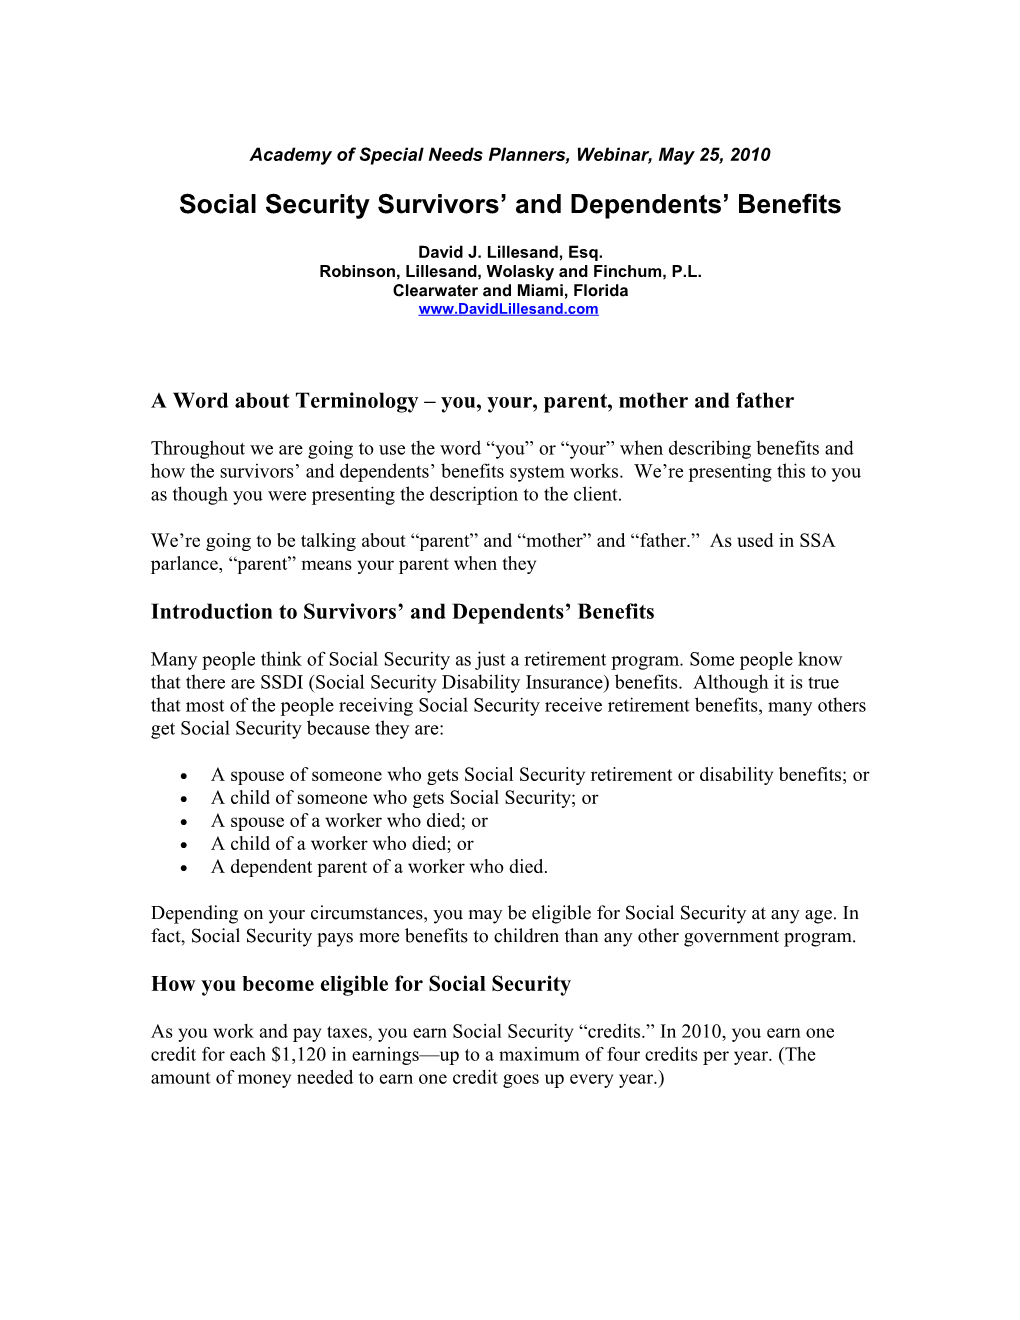 Social Security Survivors and Dependents Benefits